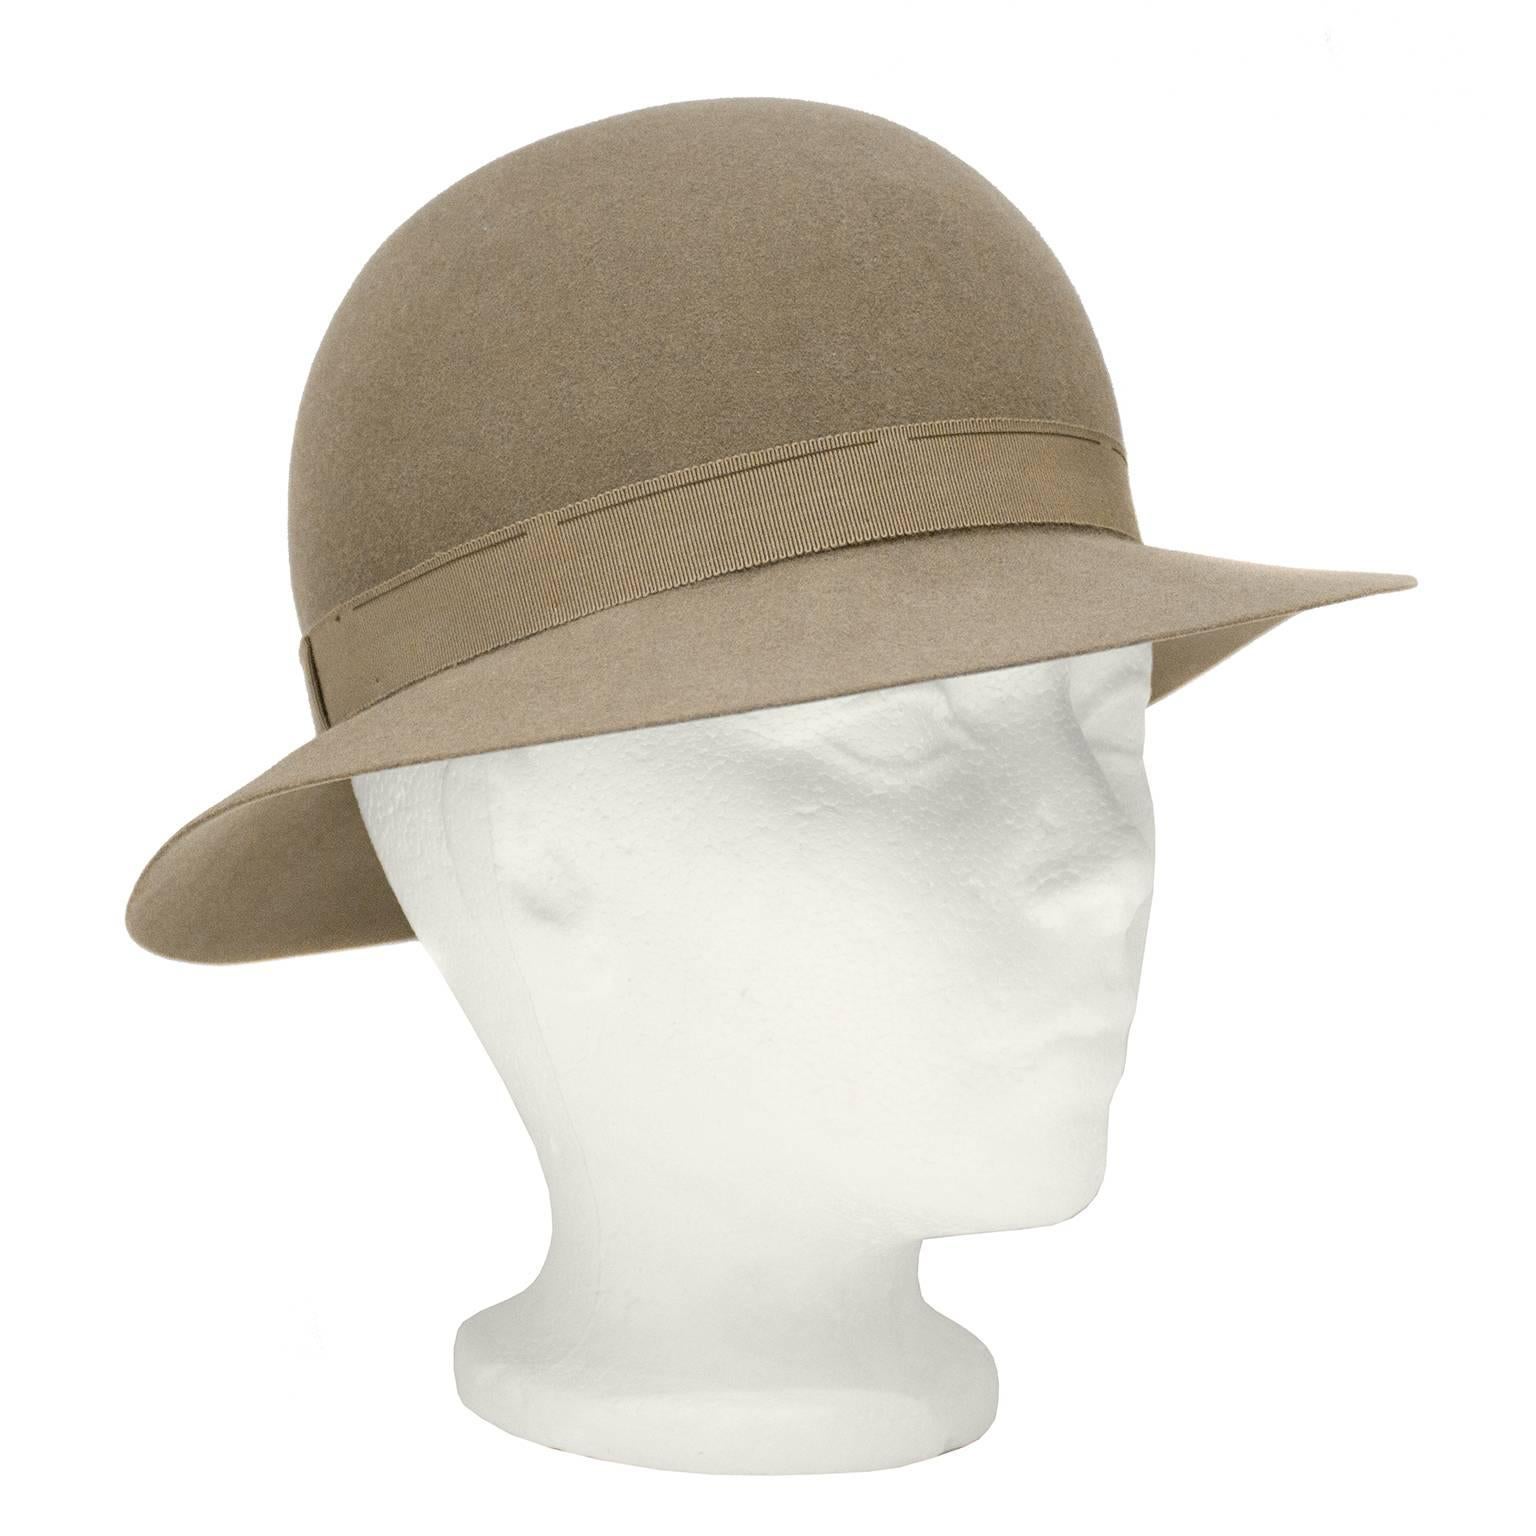 Darling 1970's Yves Saint Laurent taupe felt bowler hat. Matching taupe grosgrain ribbon trim on exterior and interior. Exterior ribbon features a flat bow. Excellent vintage condition. 

Diameter 22.5"